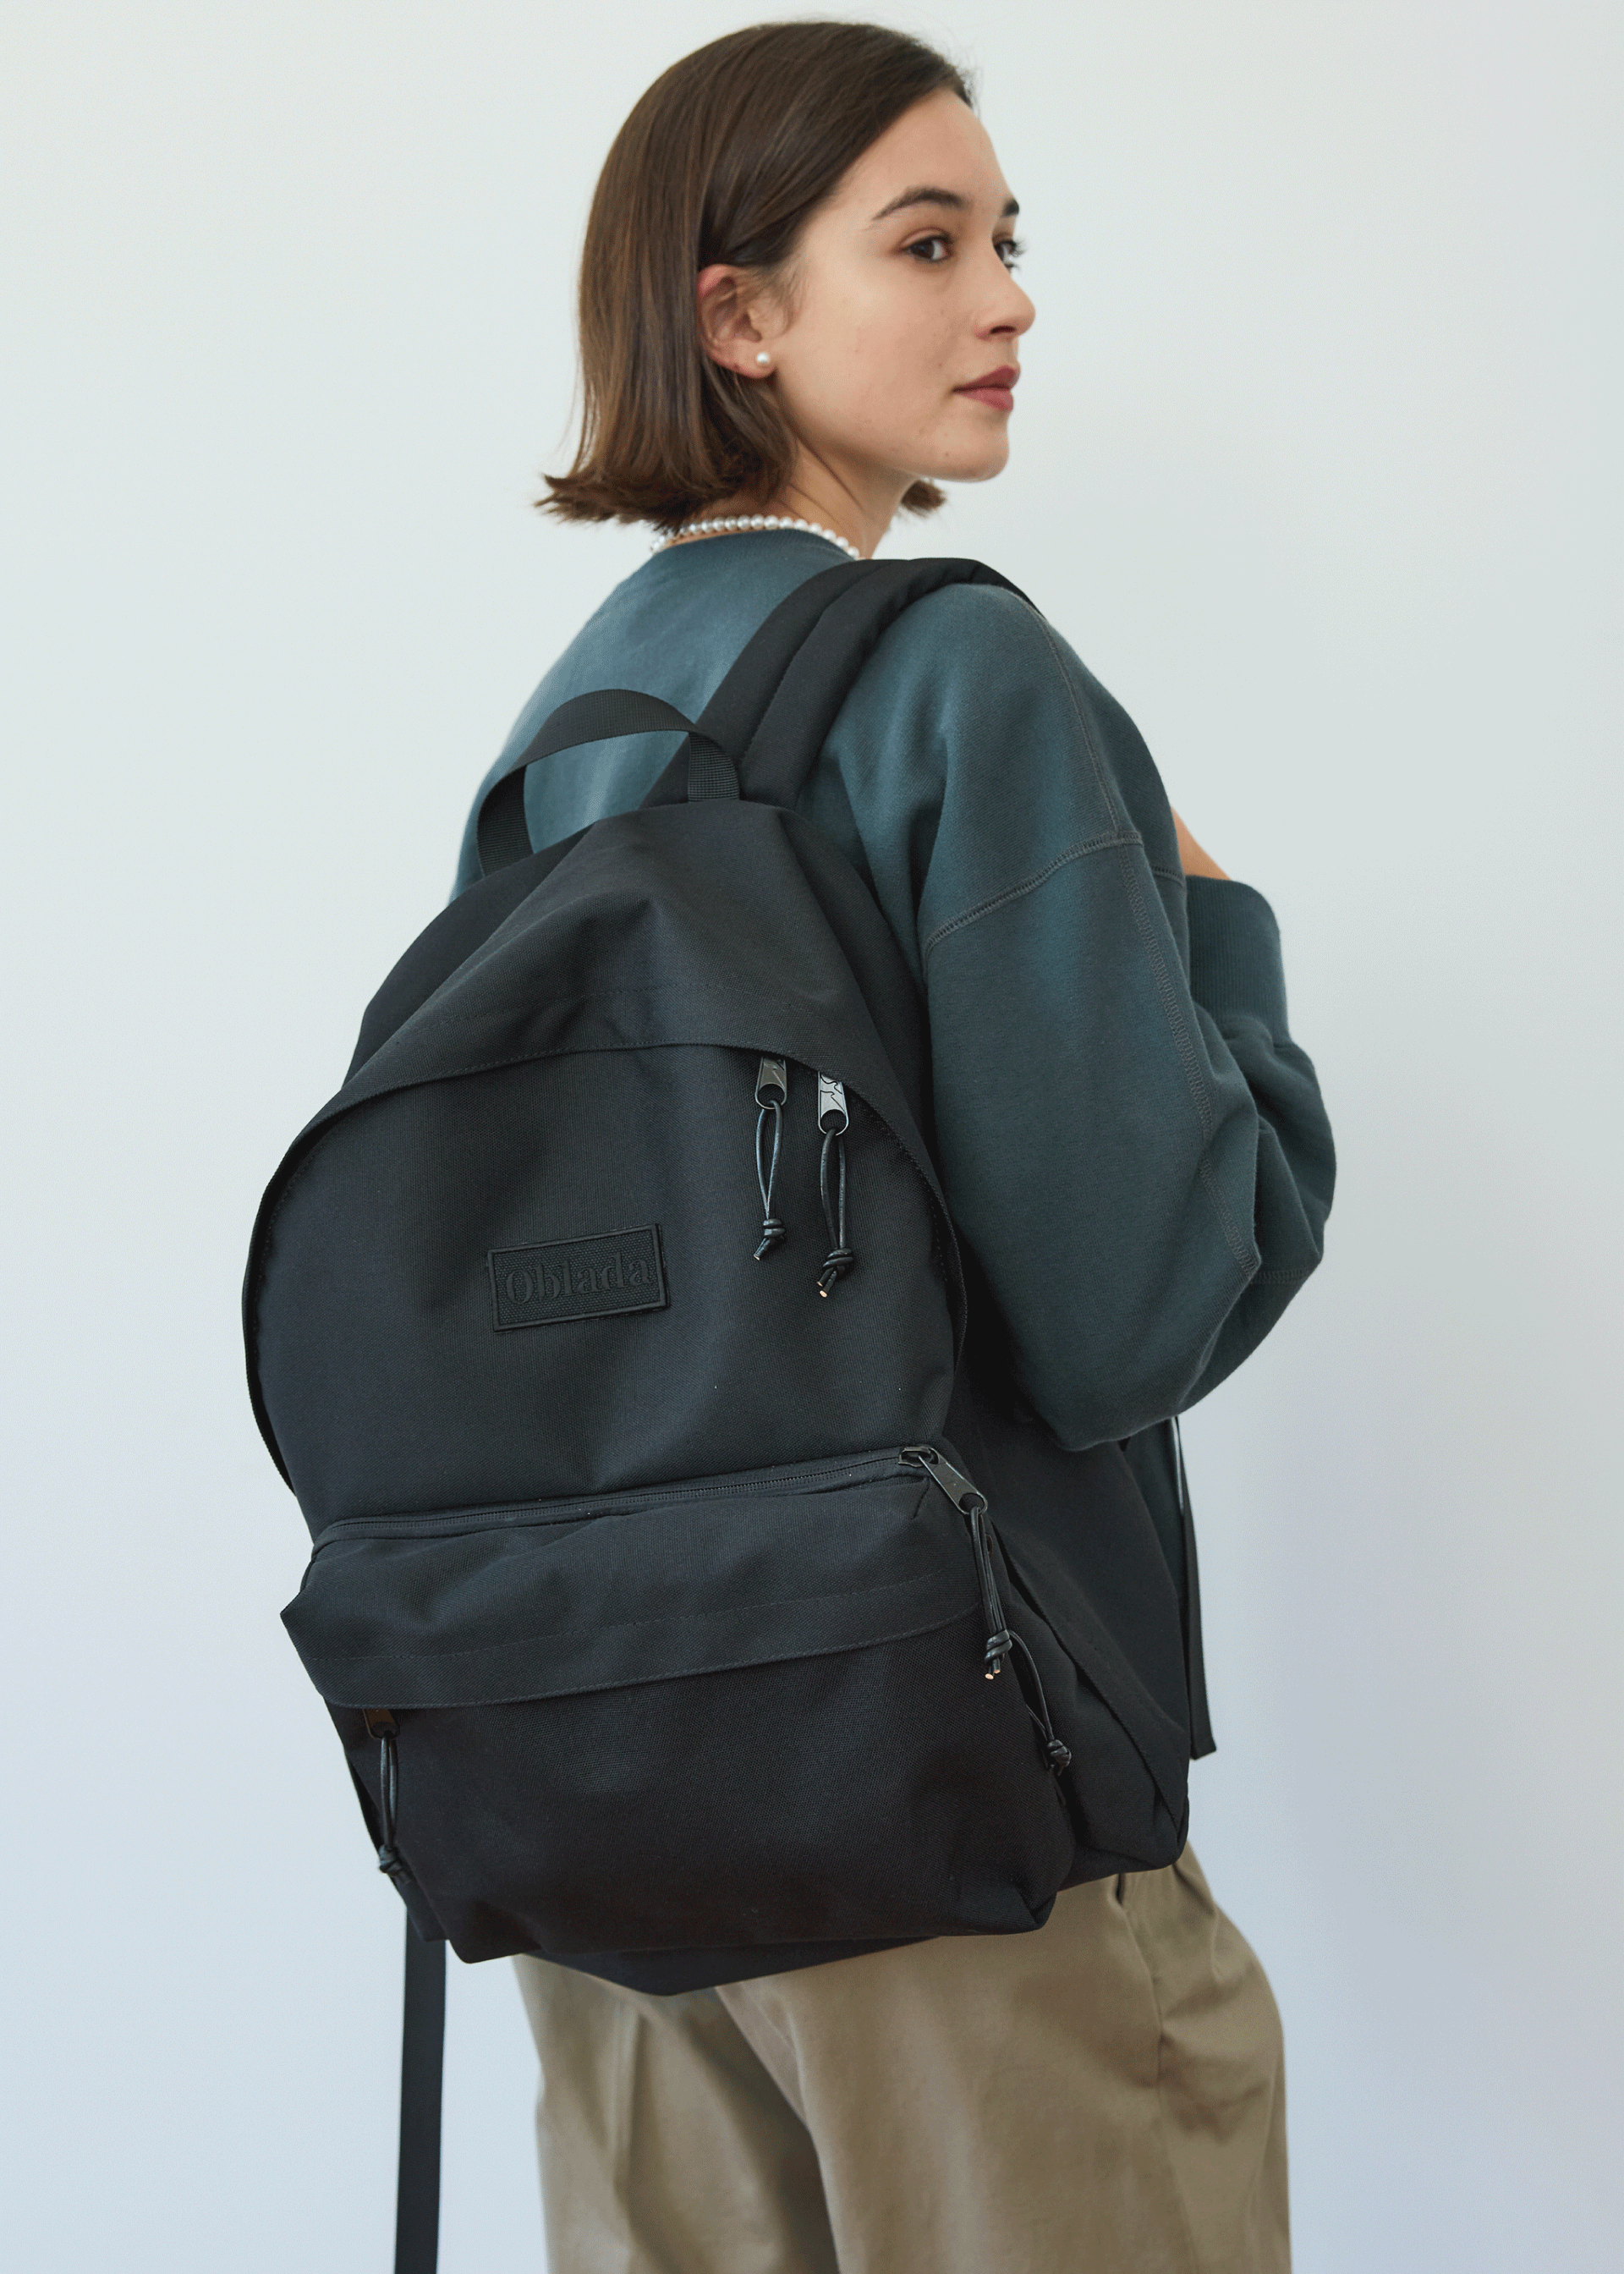 OUTDOOR PRODUCTS × Oblada ONE DAYPACK